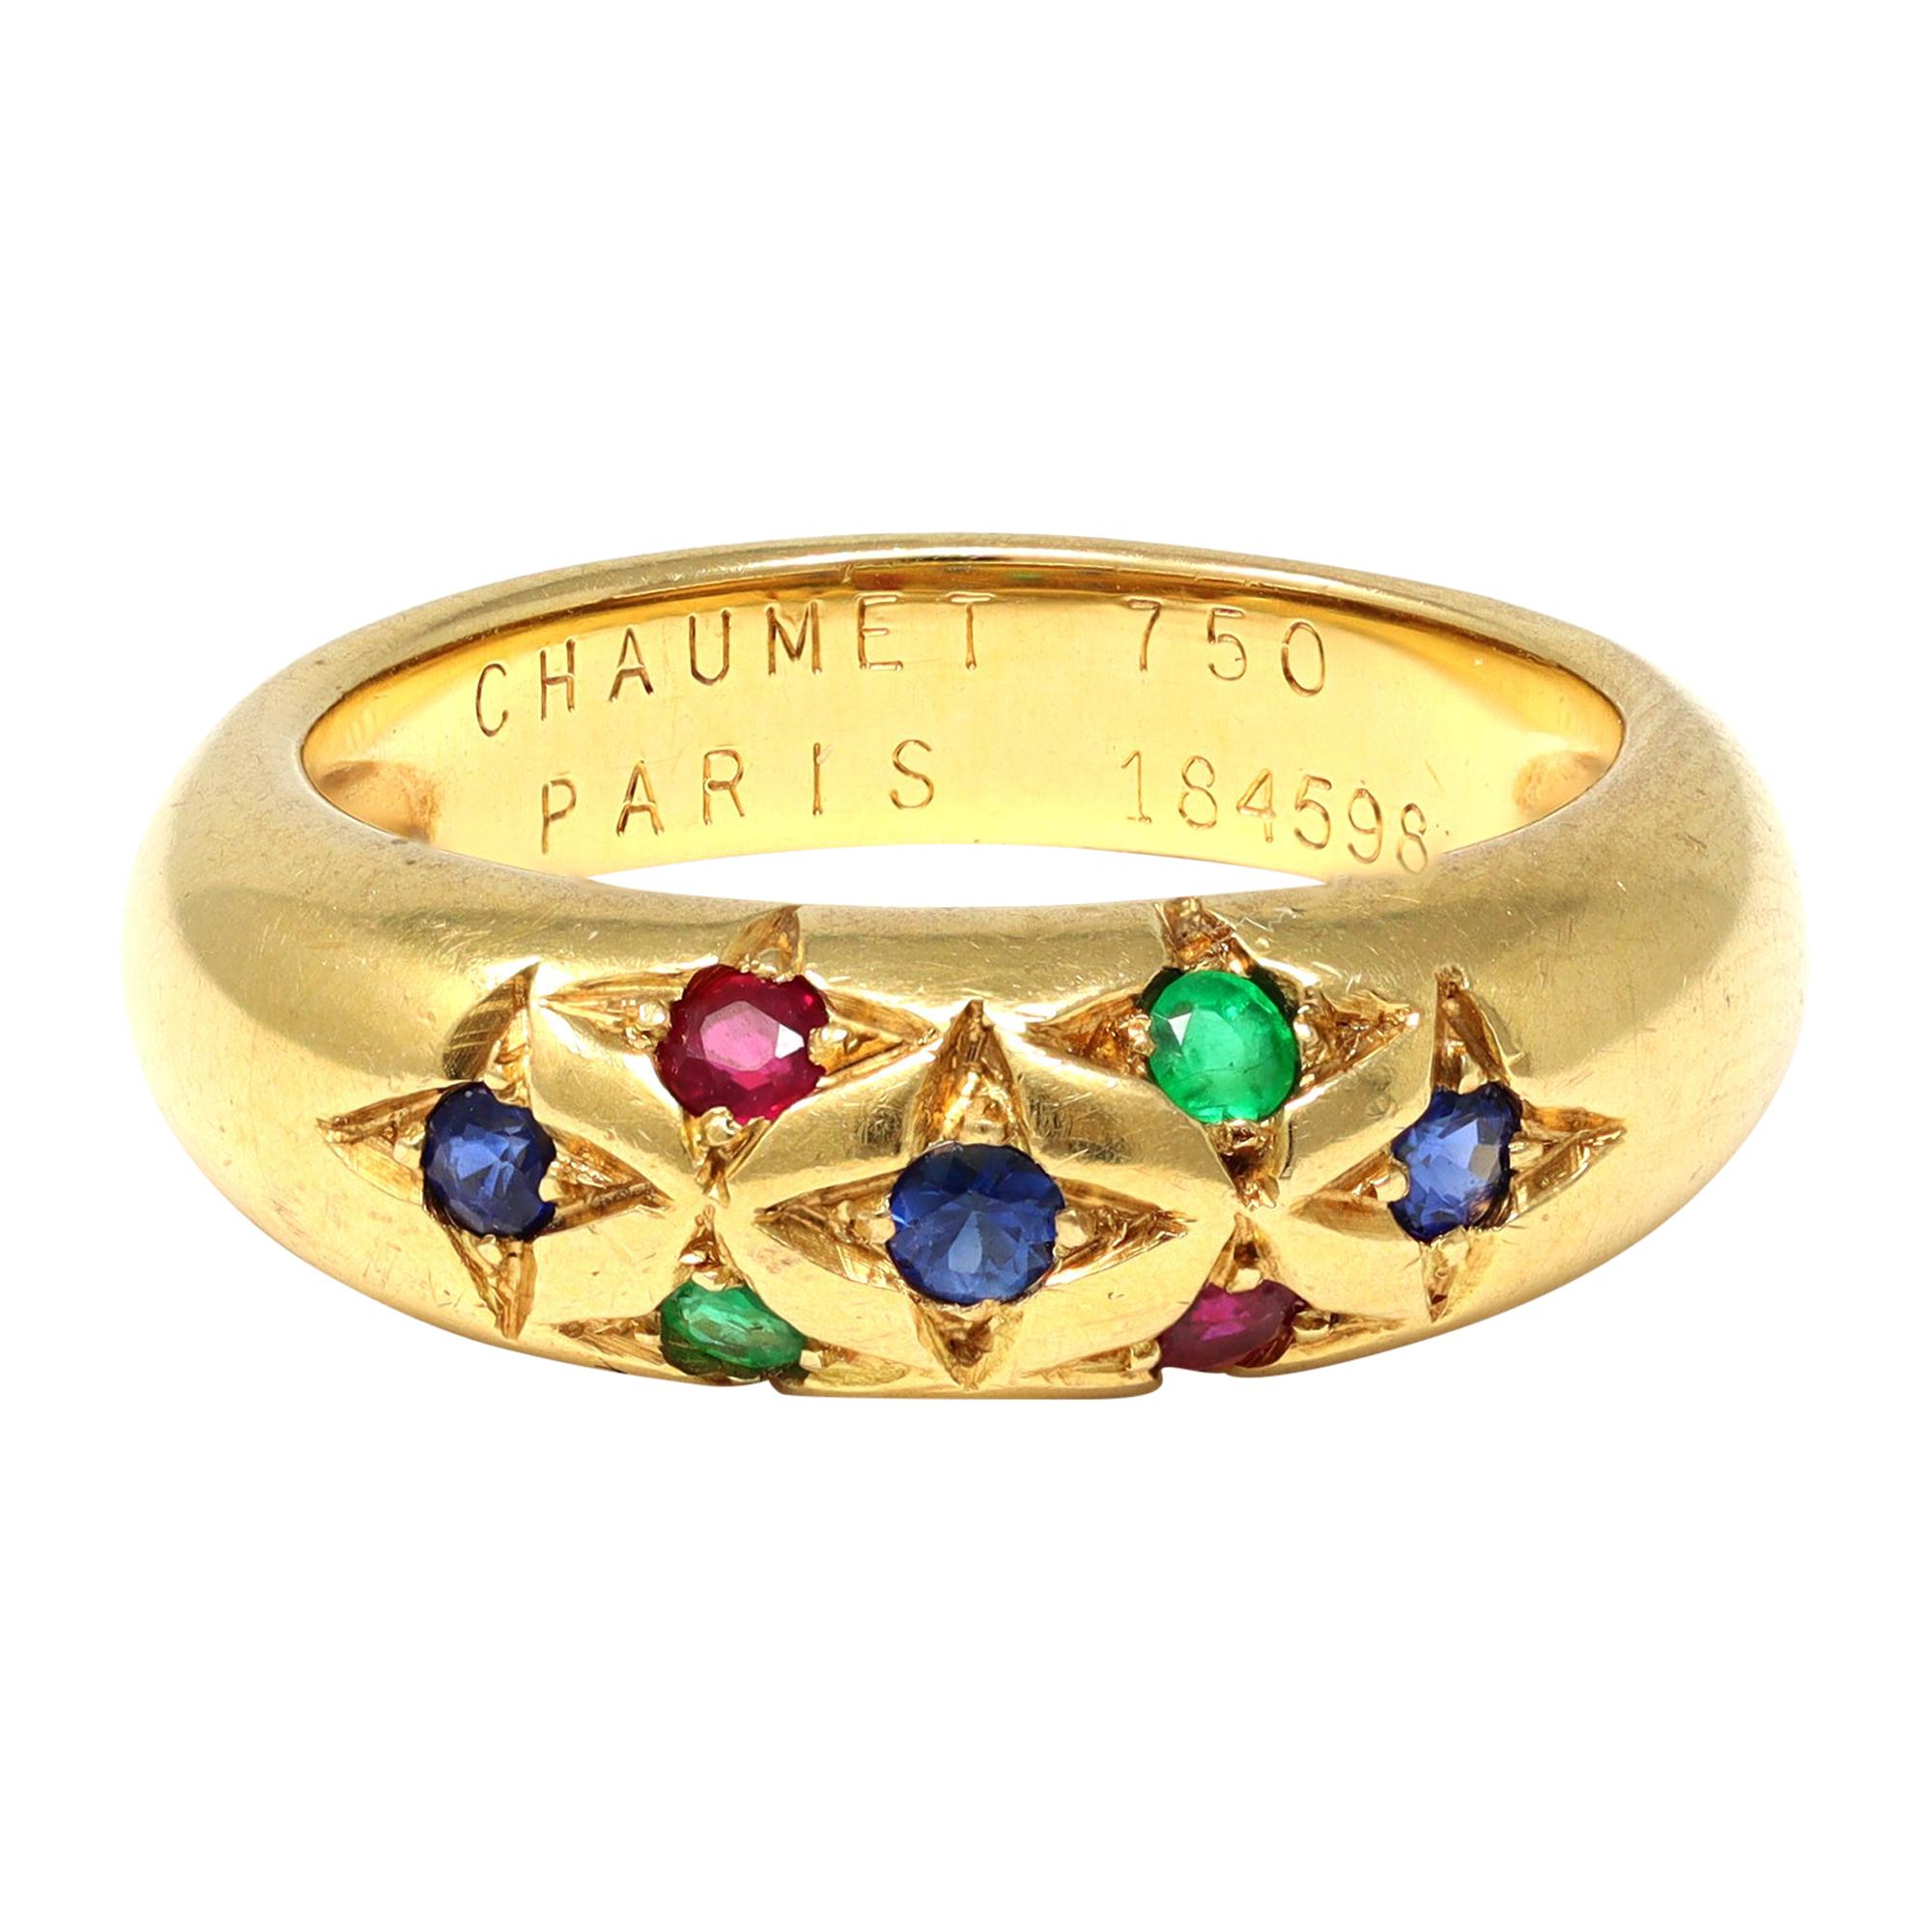 Signed Chaumet Paris Sapphire, Ruby, and Emerald Ring in 18k